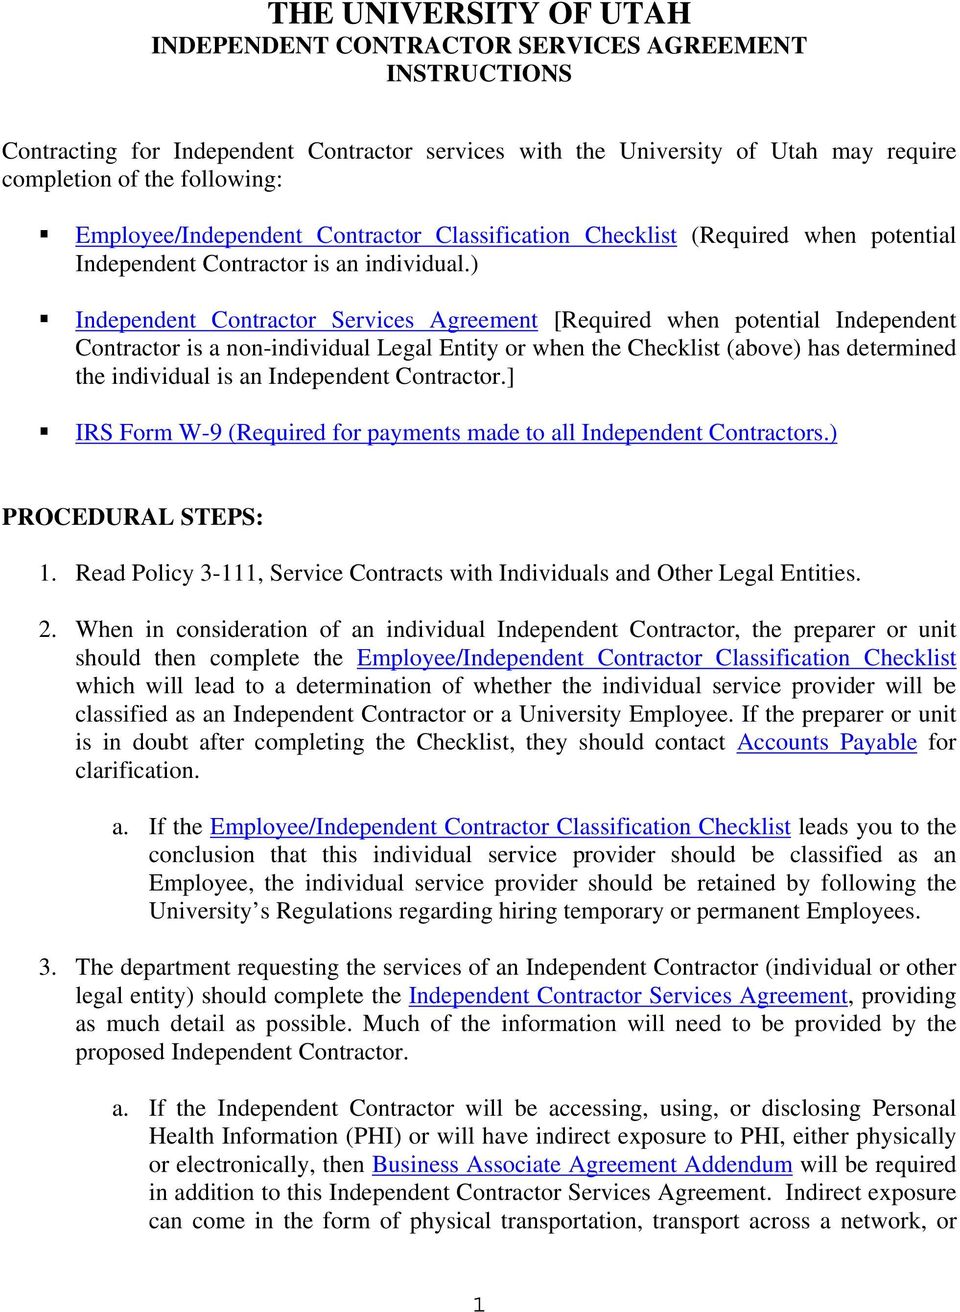 The University Of Utah Independent Contractor Services Agreement Instructions Pdf Free Download